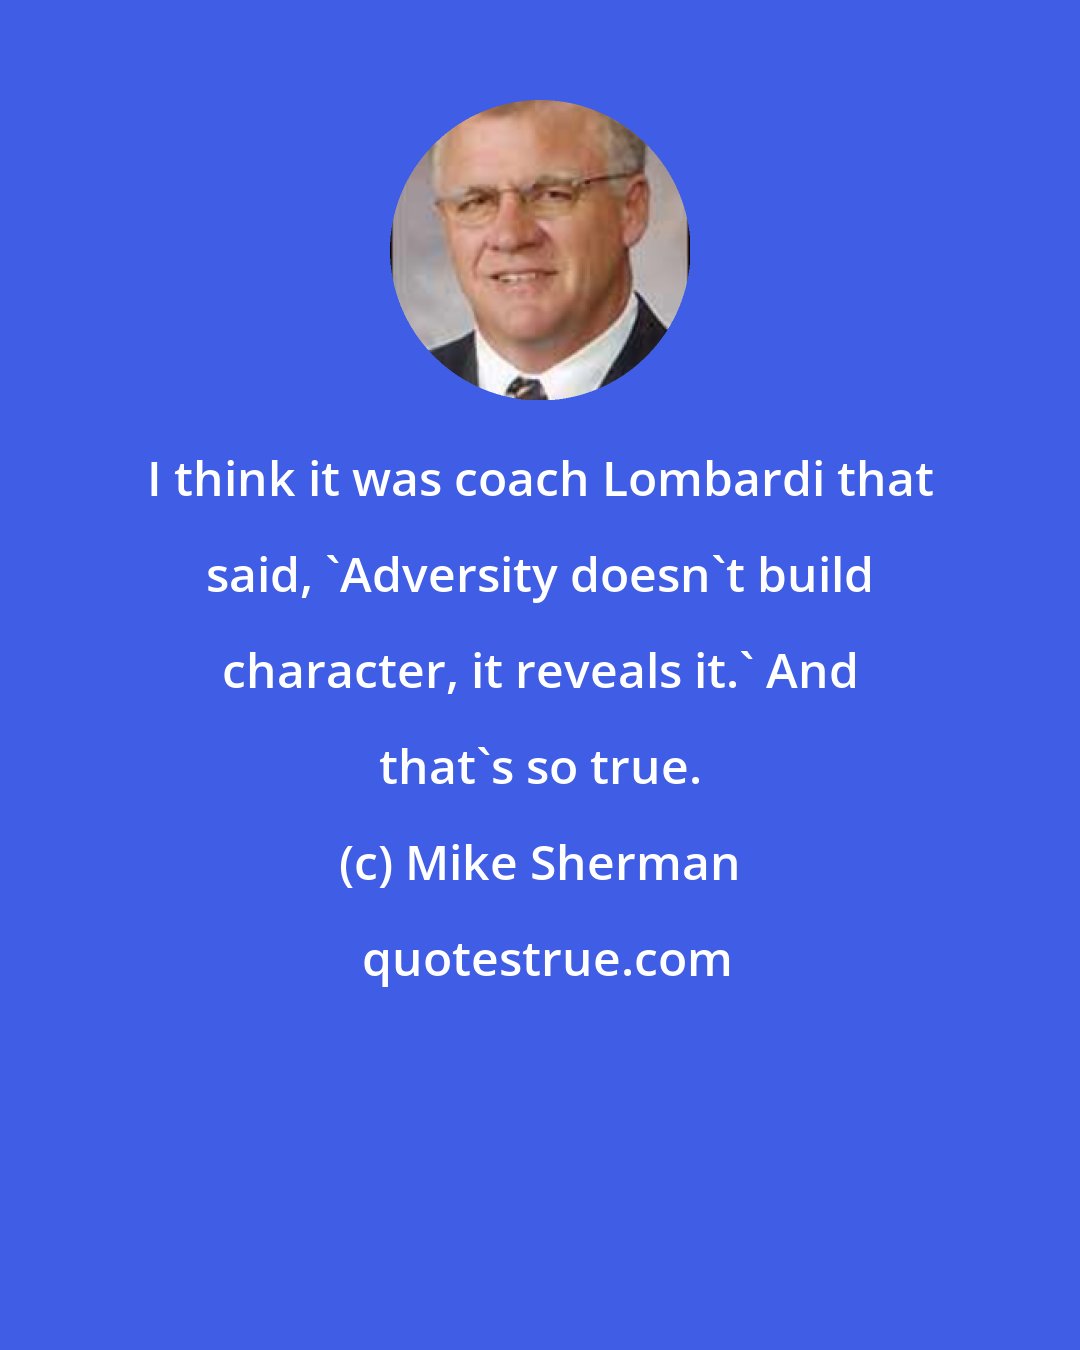 Mike Sherman: I think it was coach Lombardi that said, 'Adversity doesn't build character, it reveals it.' And that's so true.